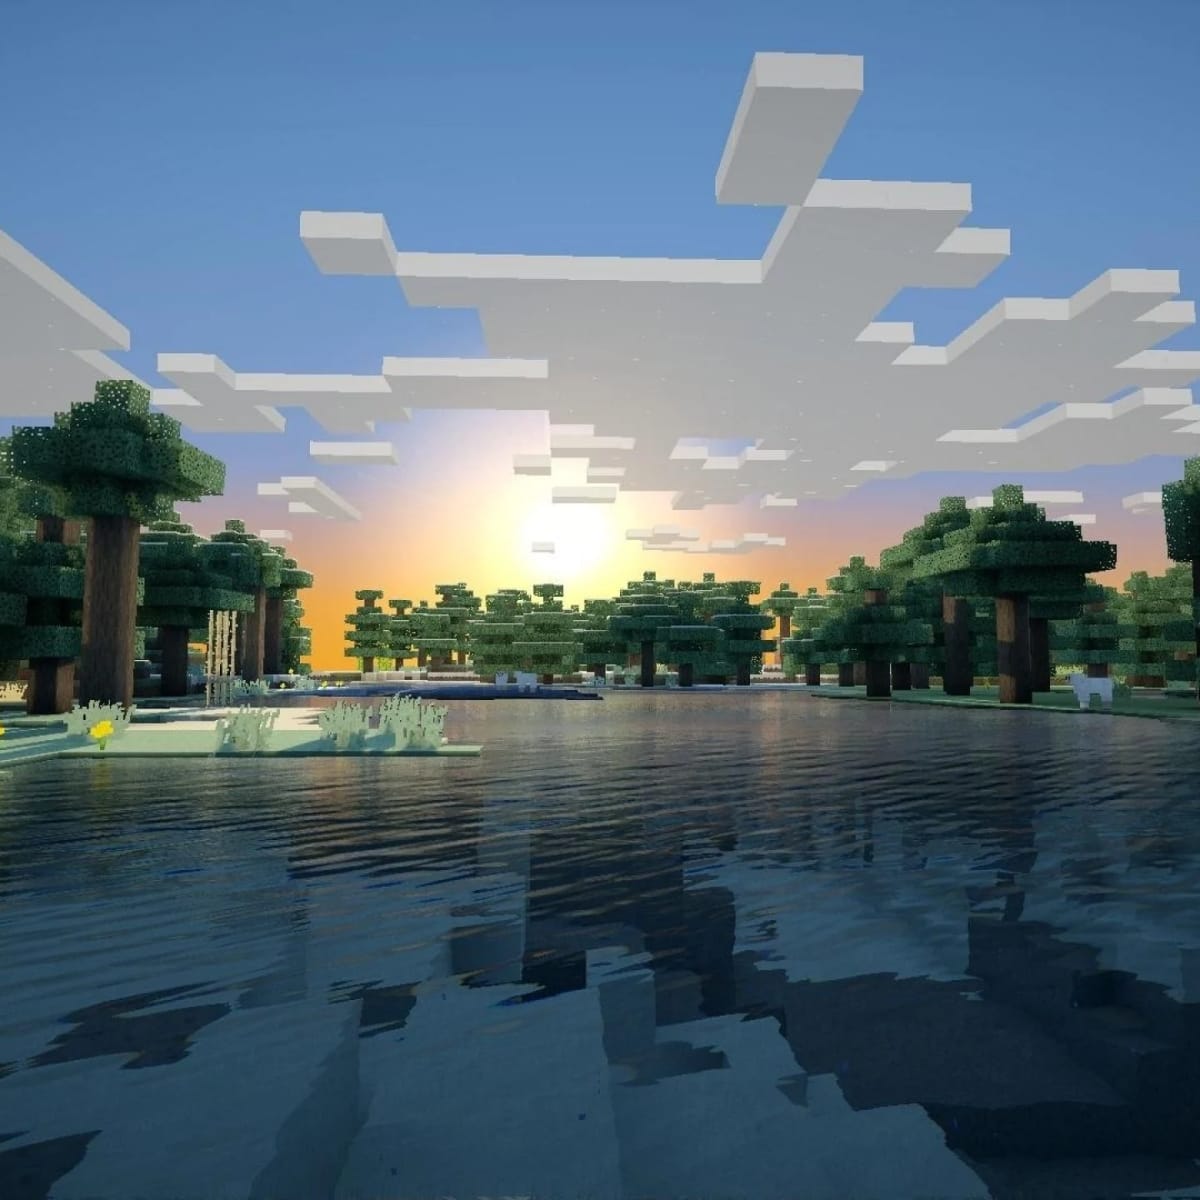 minecraft pro design wallpapers Wallpapers